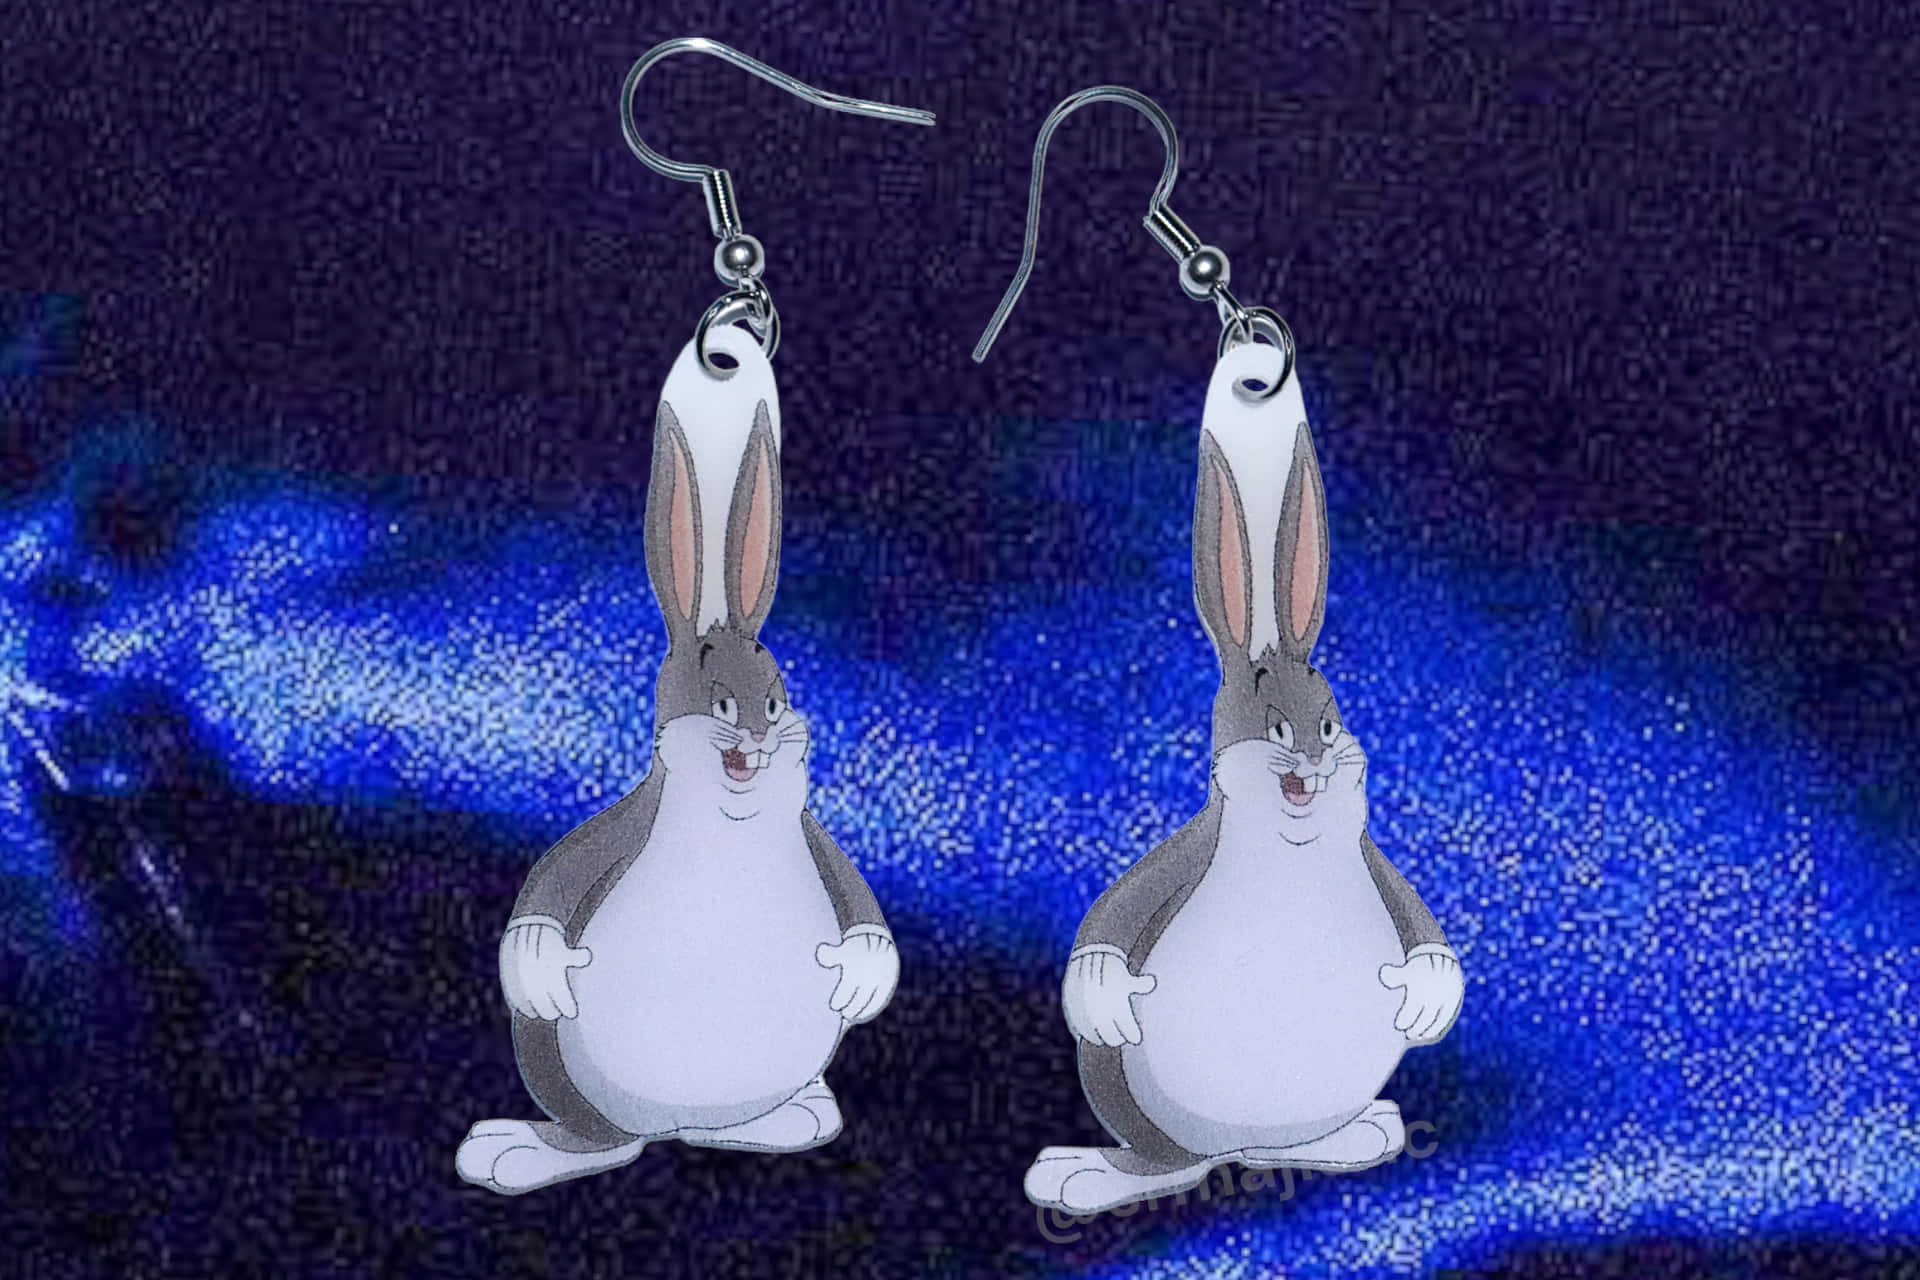 A Pair Of Cartoon Rabbit Earrings On A Blue Background Background